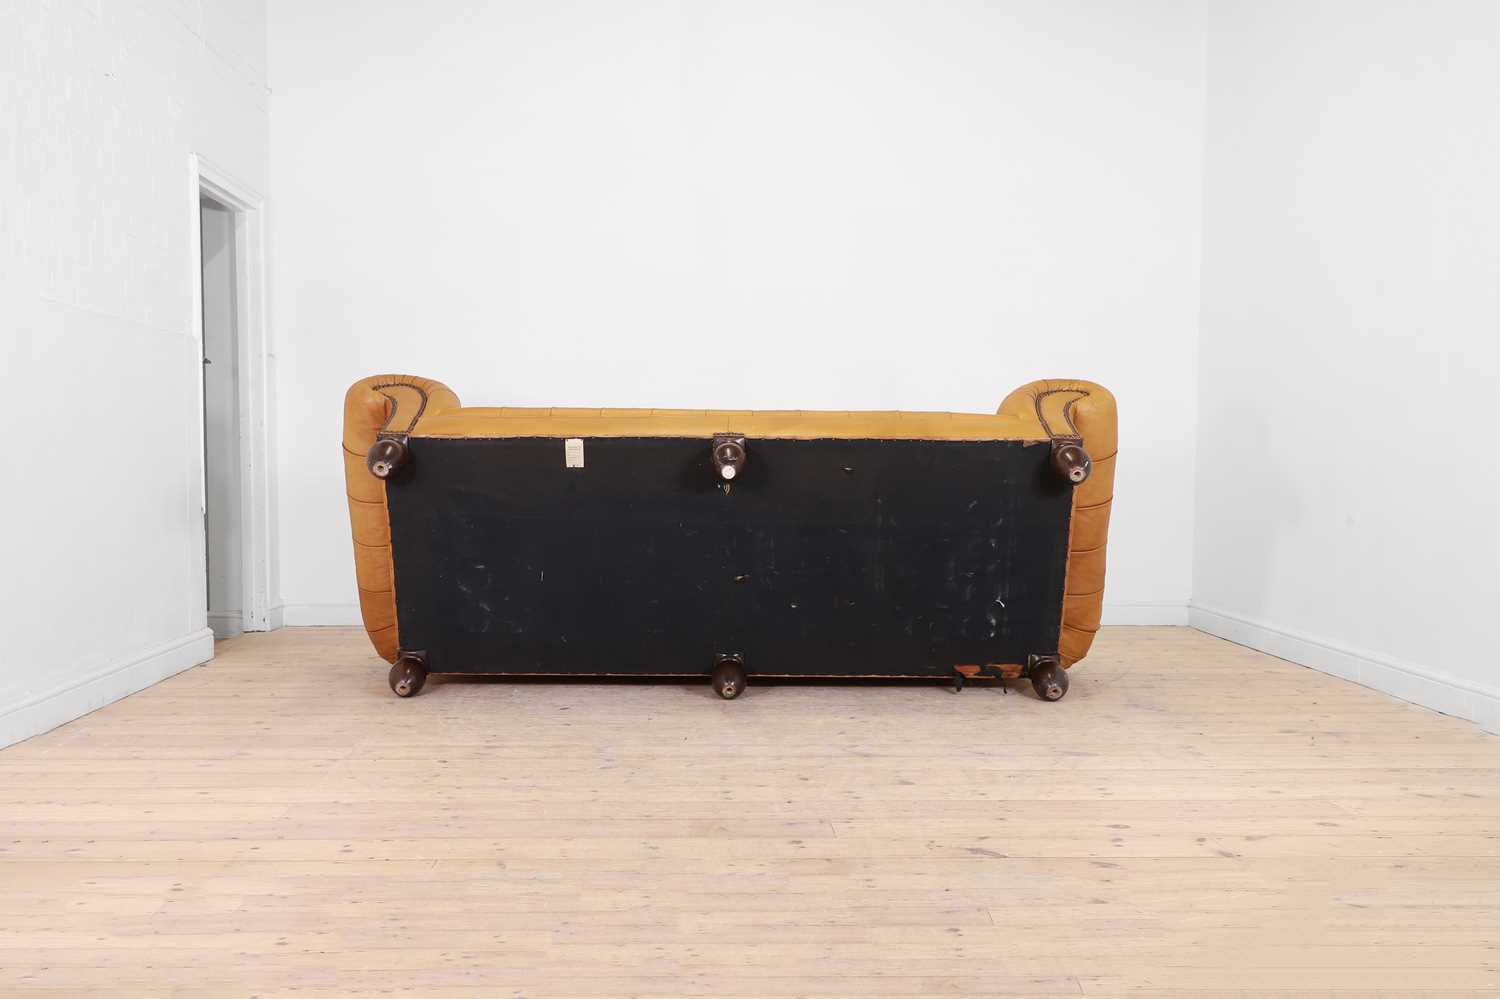 A chesterfield sofa by George Smith, - Image 3 of 8